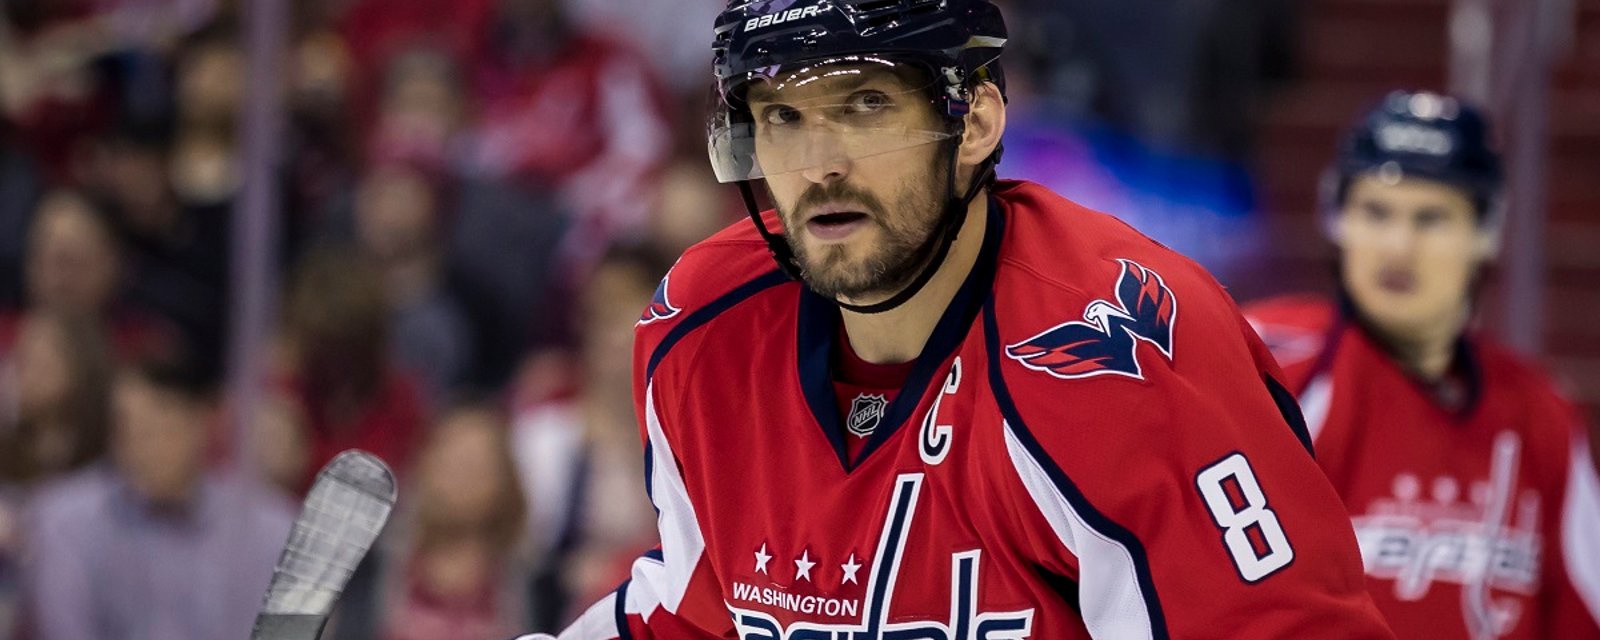 Breaking: Gruesome photos of Alex Ovechkin's injuries revealed!